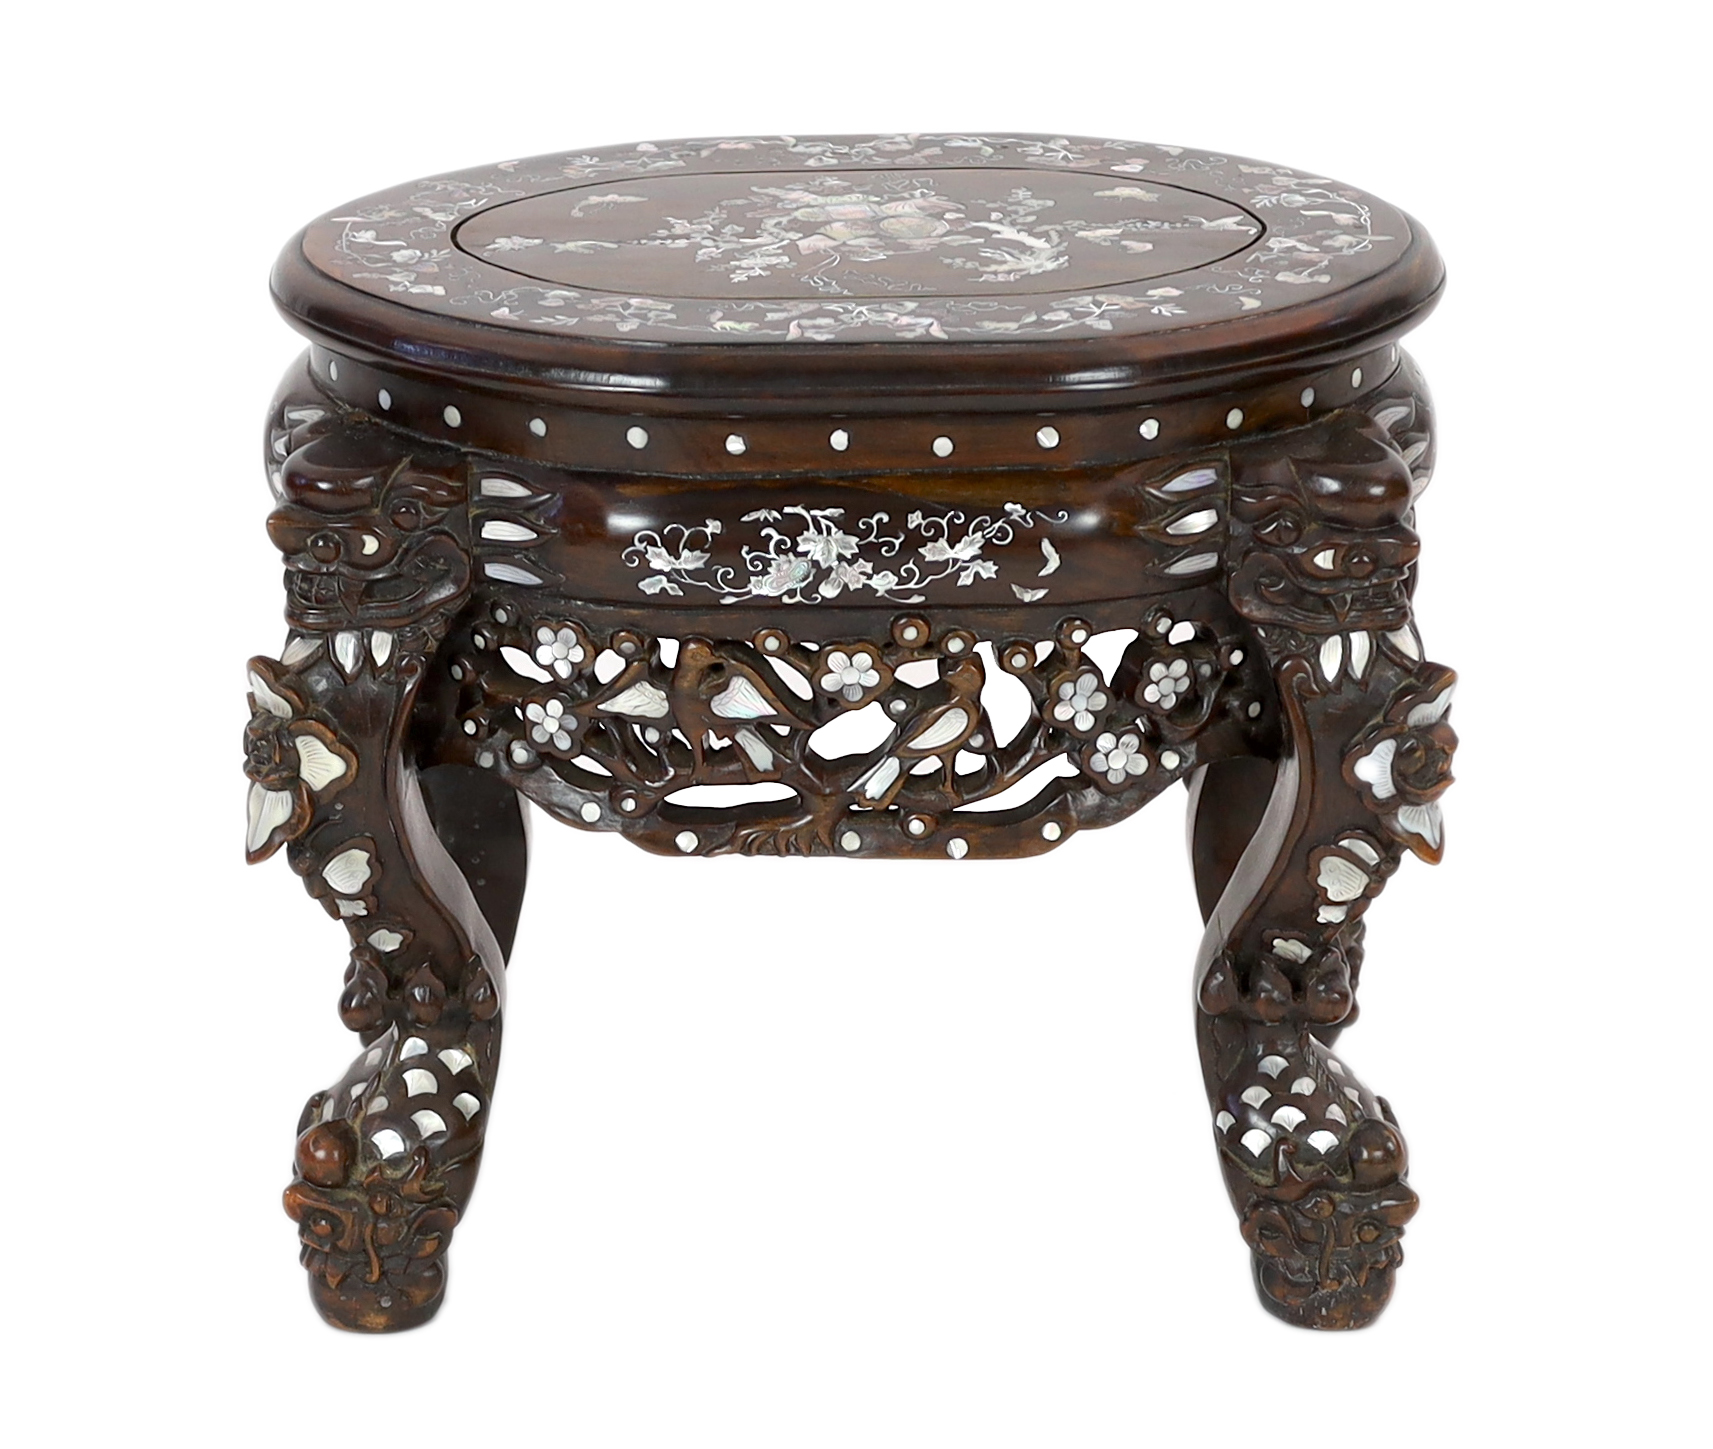 A Chinese hongmu and mother-of-pearl inlaid stool or stand, mid 20th century